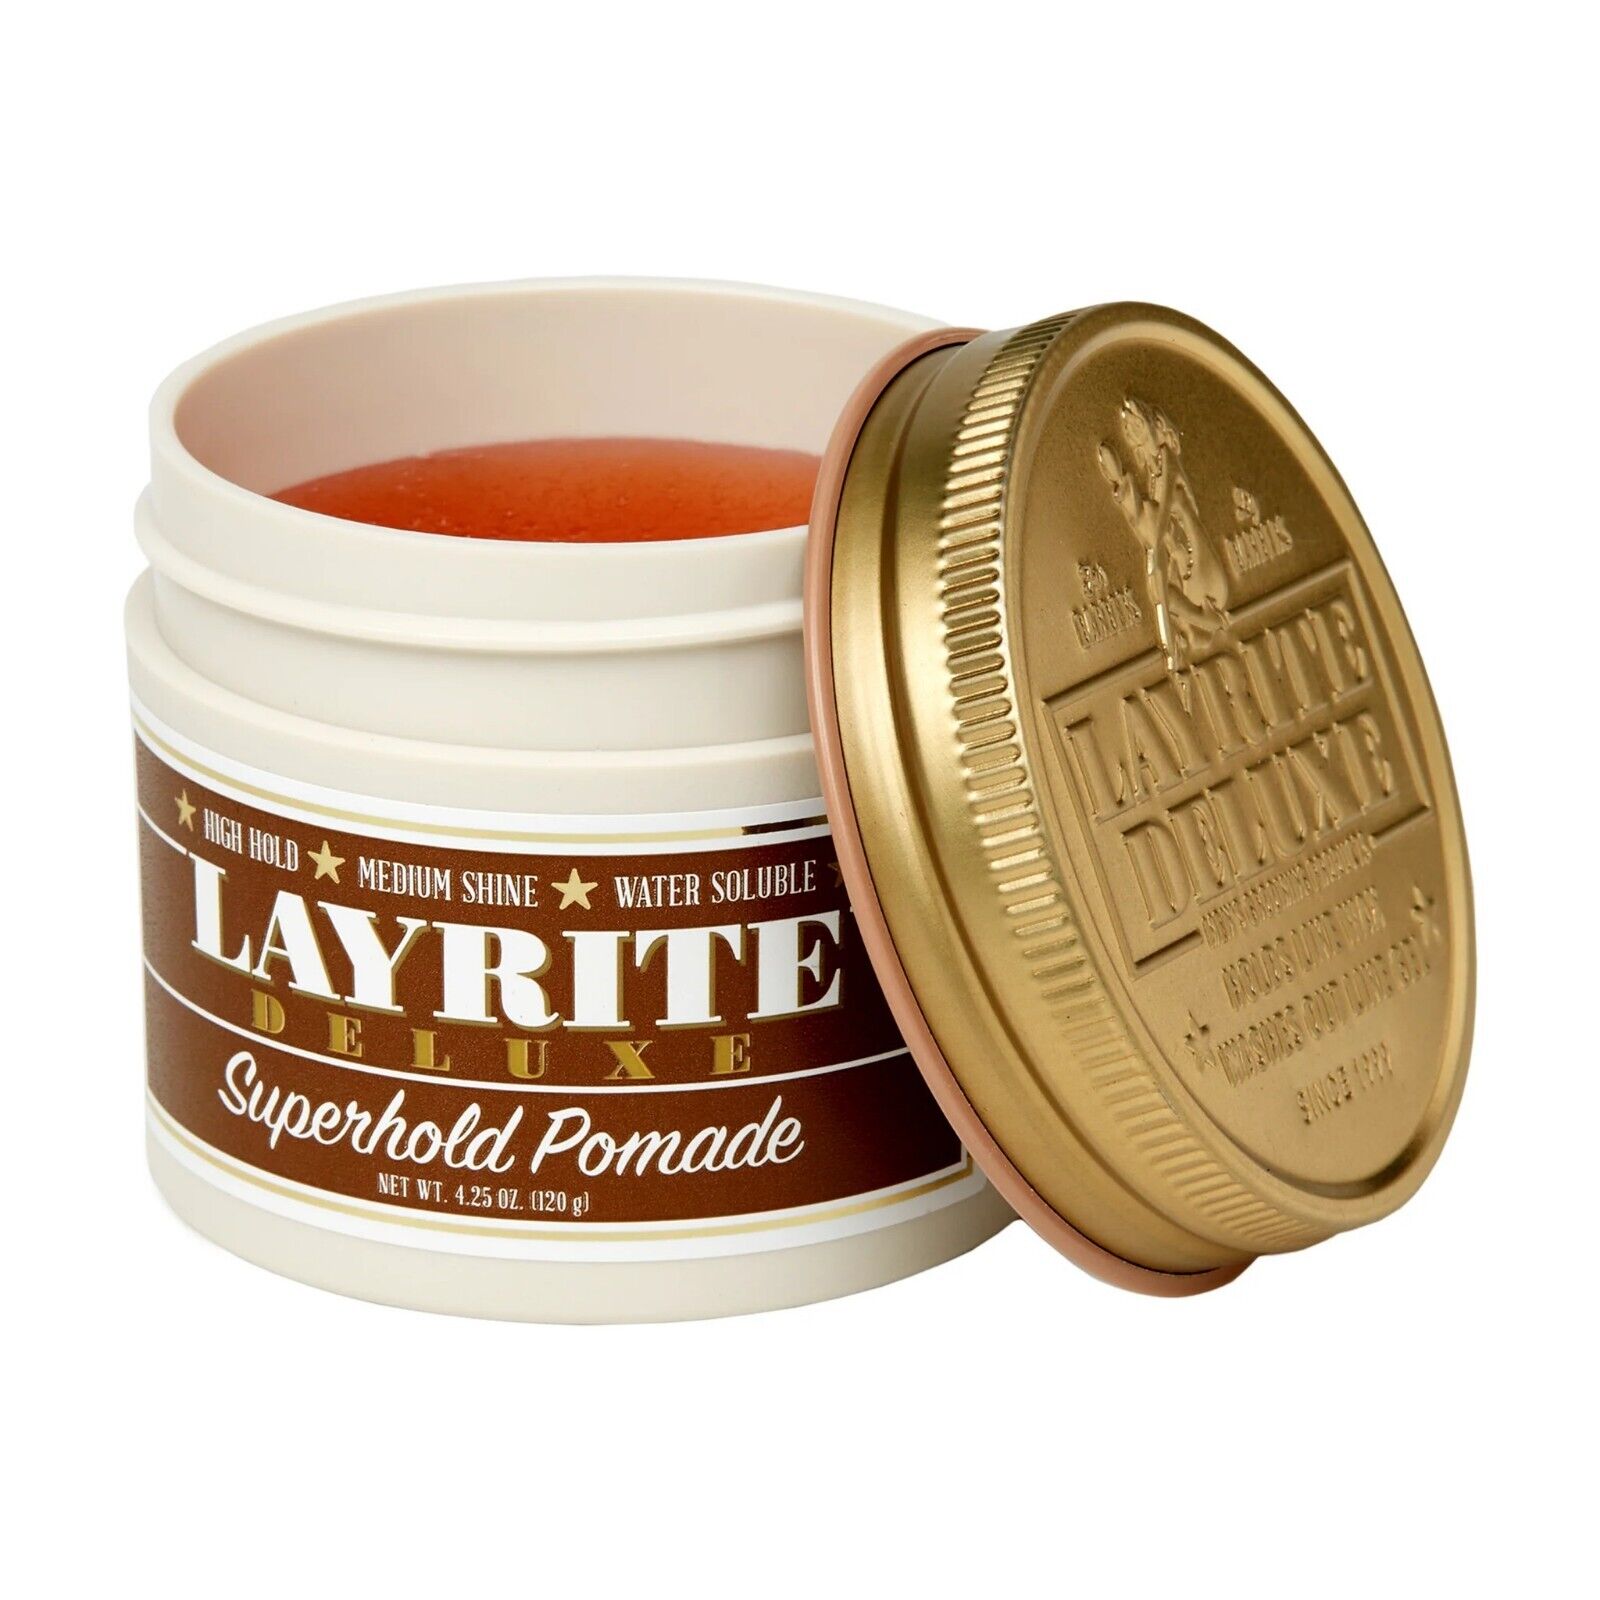 Layrite Super Hold Pomade, 4.25 oz